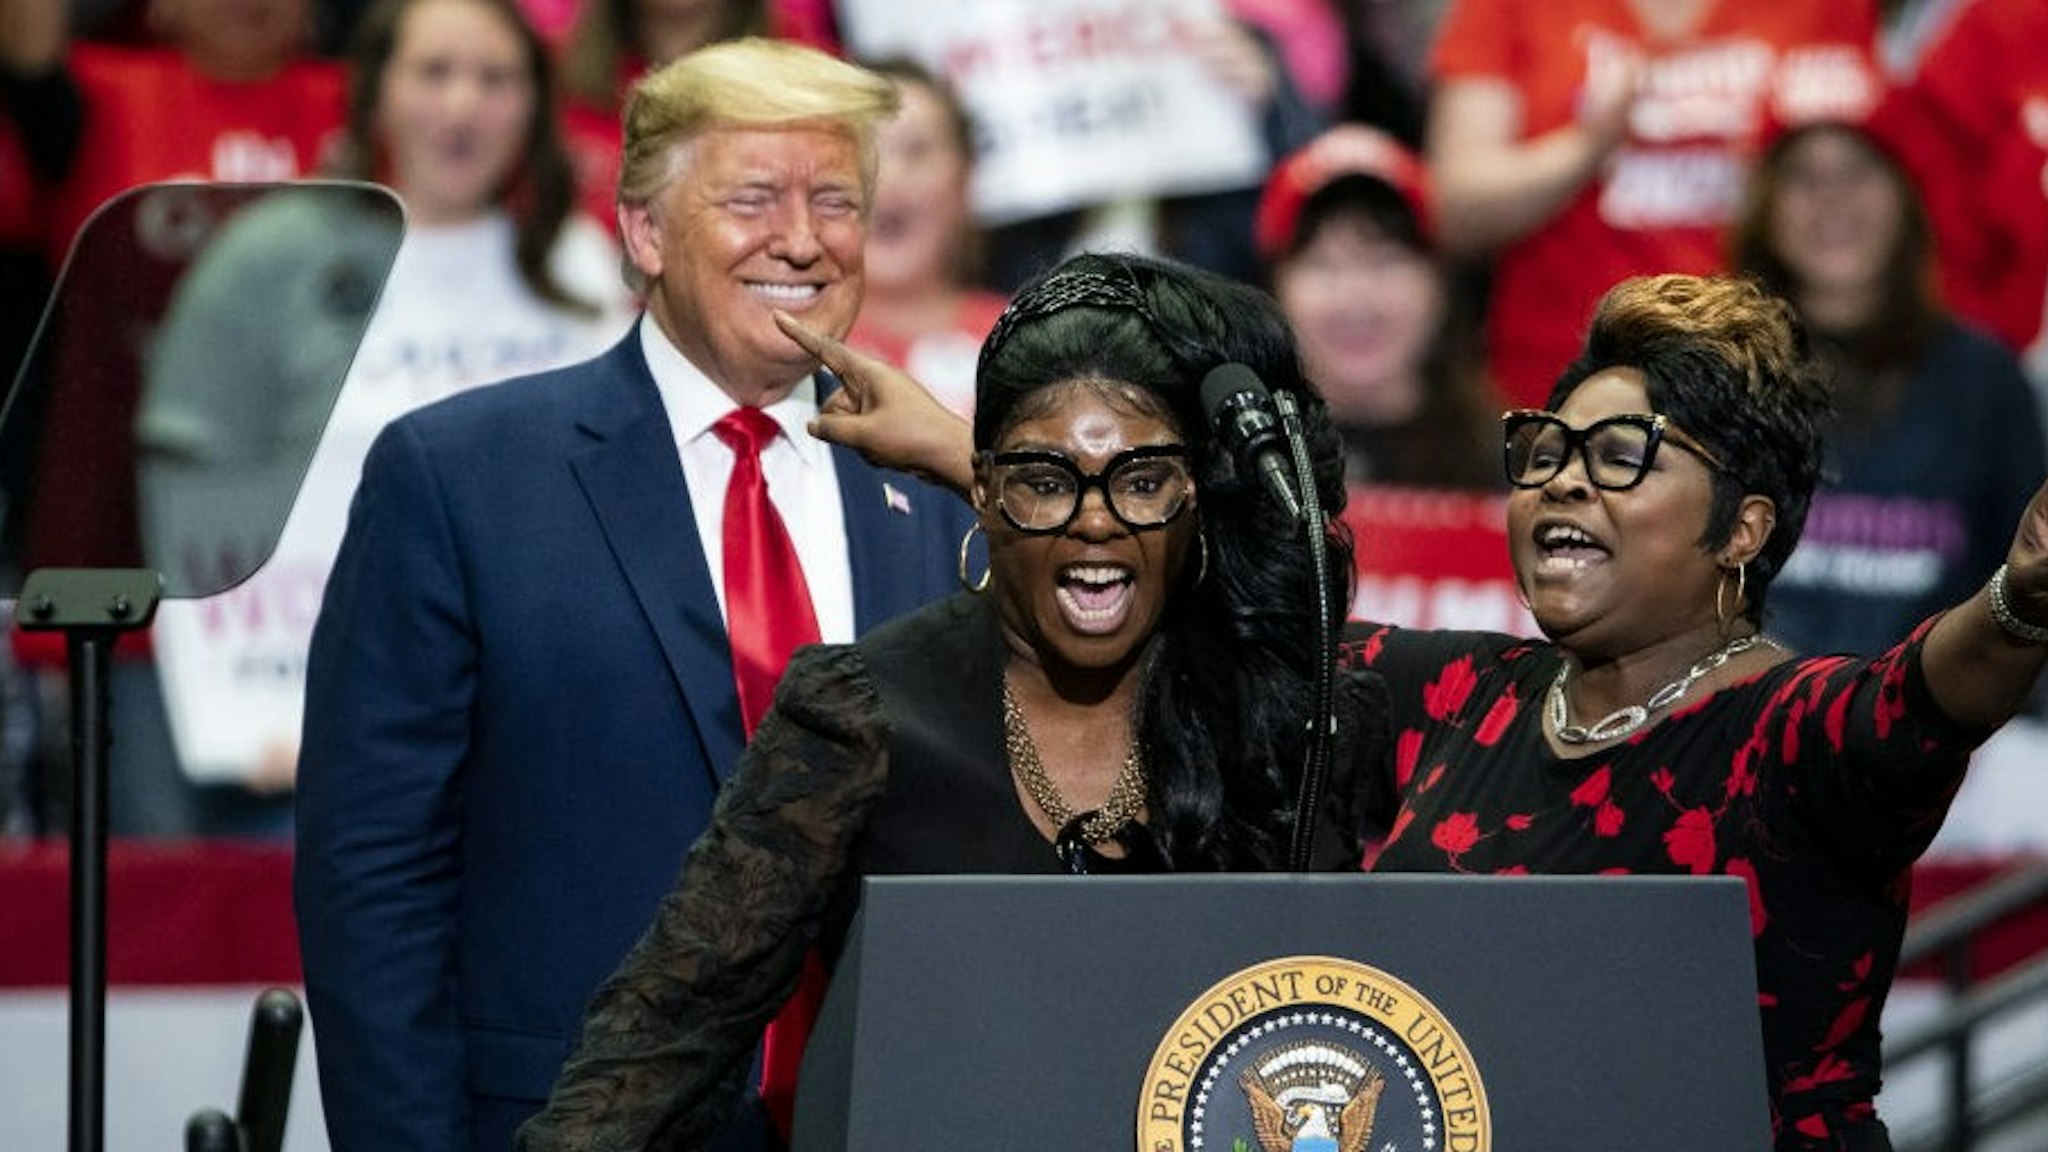 Social Media influencers and video bloggers Lynnette "Diamond" Hardaway, center, and Rochelle "Silk" Richardson, right, speak as U.S. President Donald Trump smiles during a rally in Charlotte, North Carolina, on Monday, March 2, 2020. Trump told reporters in the Oval Office on Monday that holding campaign rallies with thousands of attendees is "very safe" despite recent cases of the virus in the U.S. Photographer: